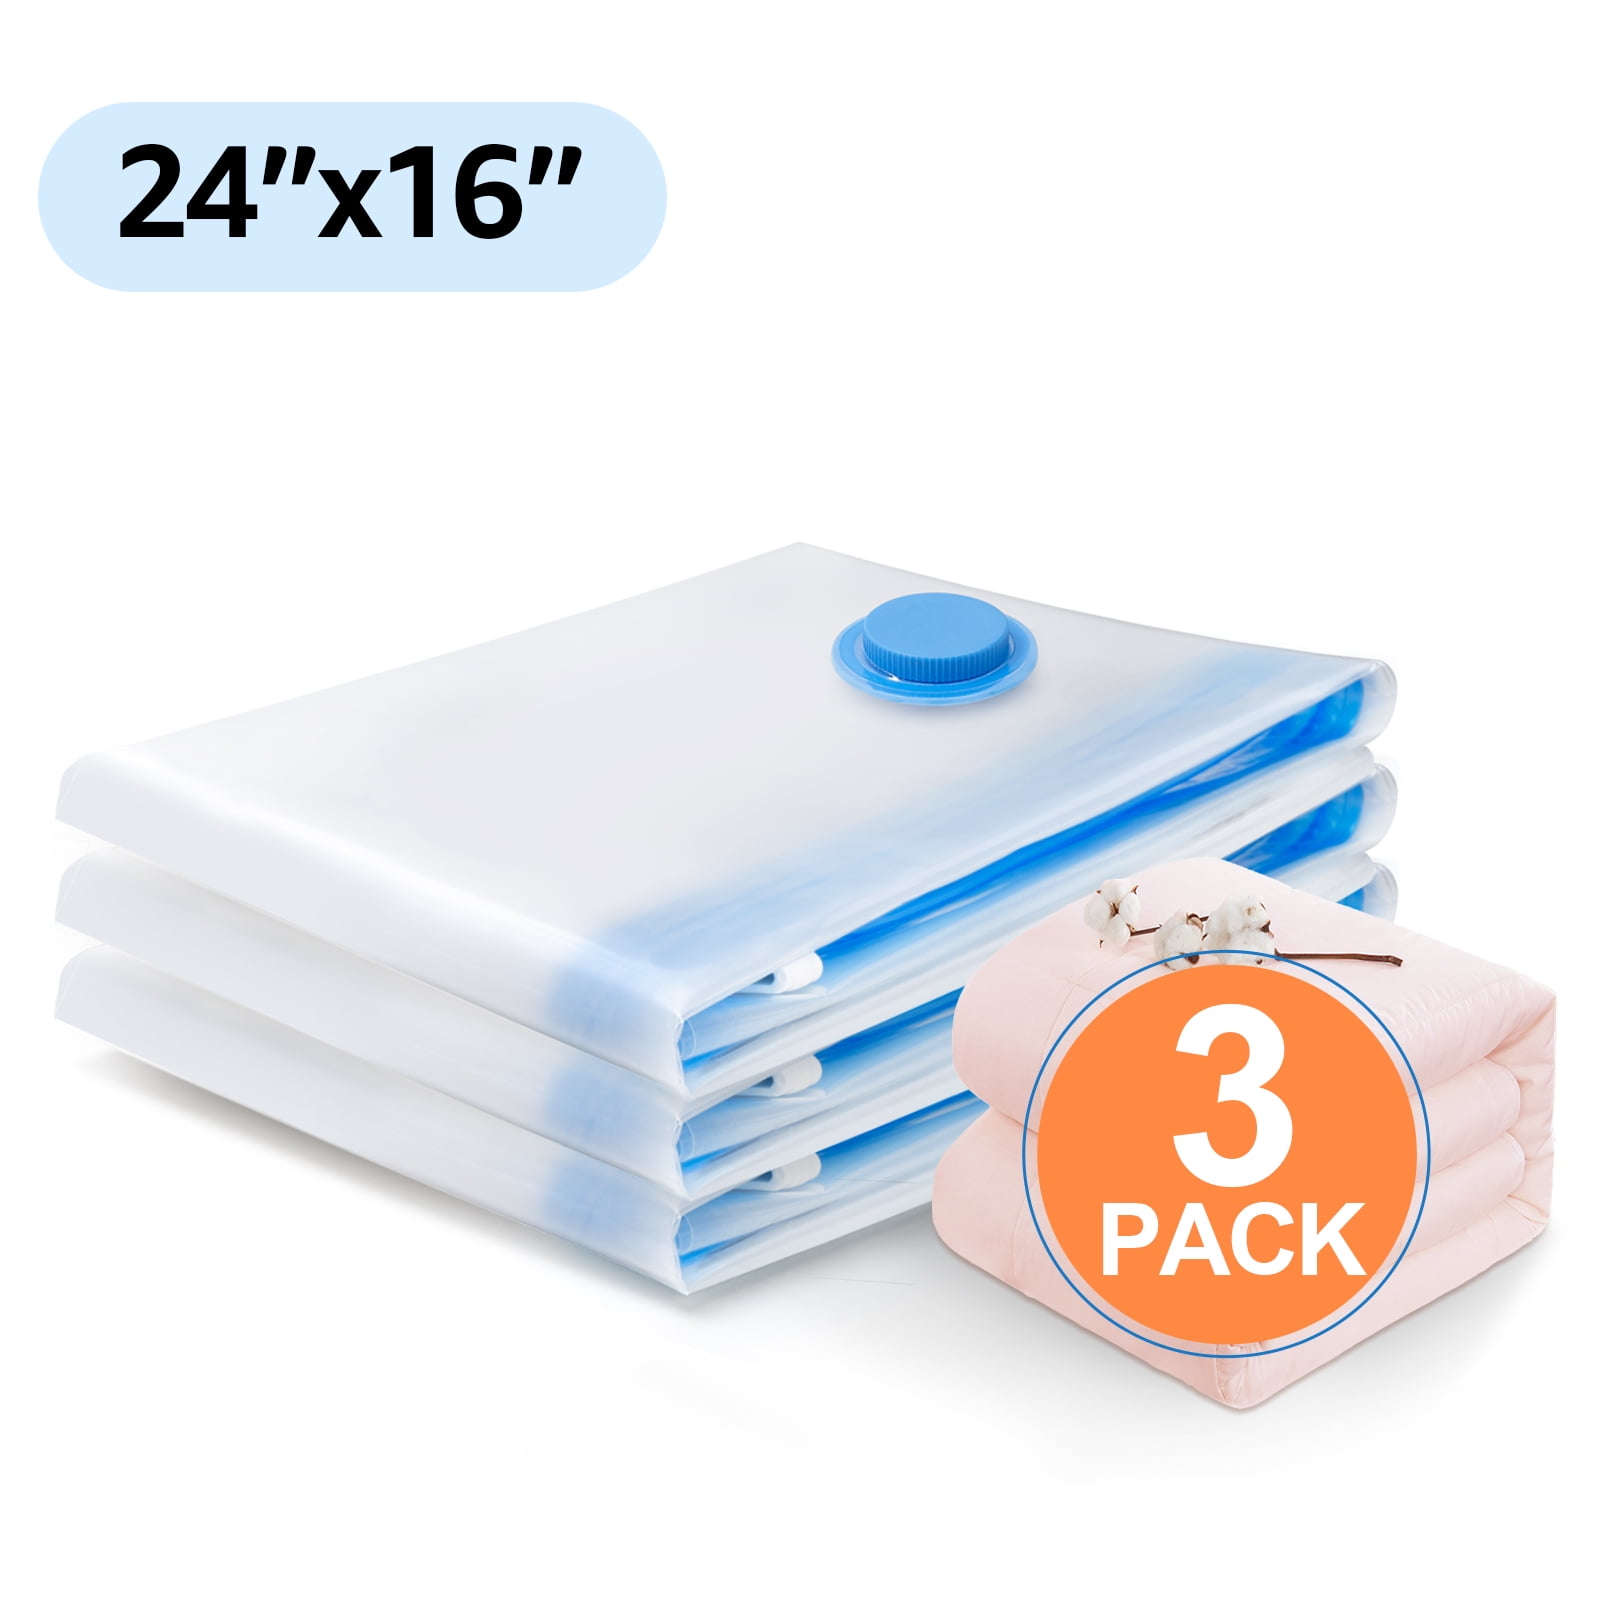 Vacuum Sealer Bags - Airtight Space Saver Bags in 6 Sizes with